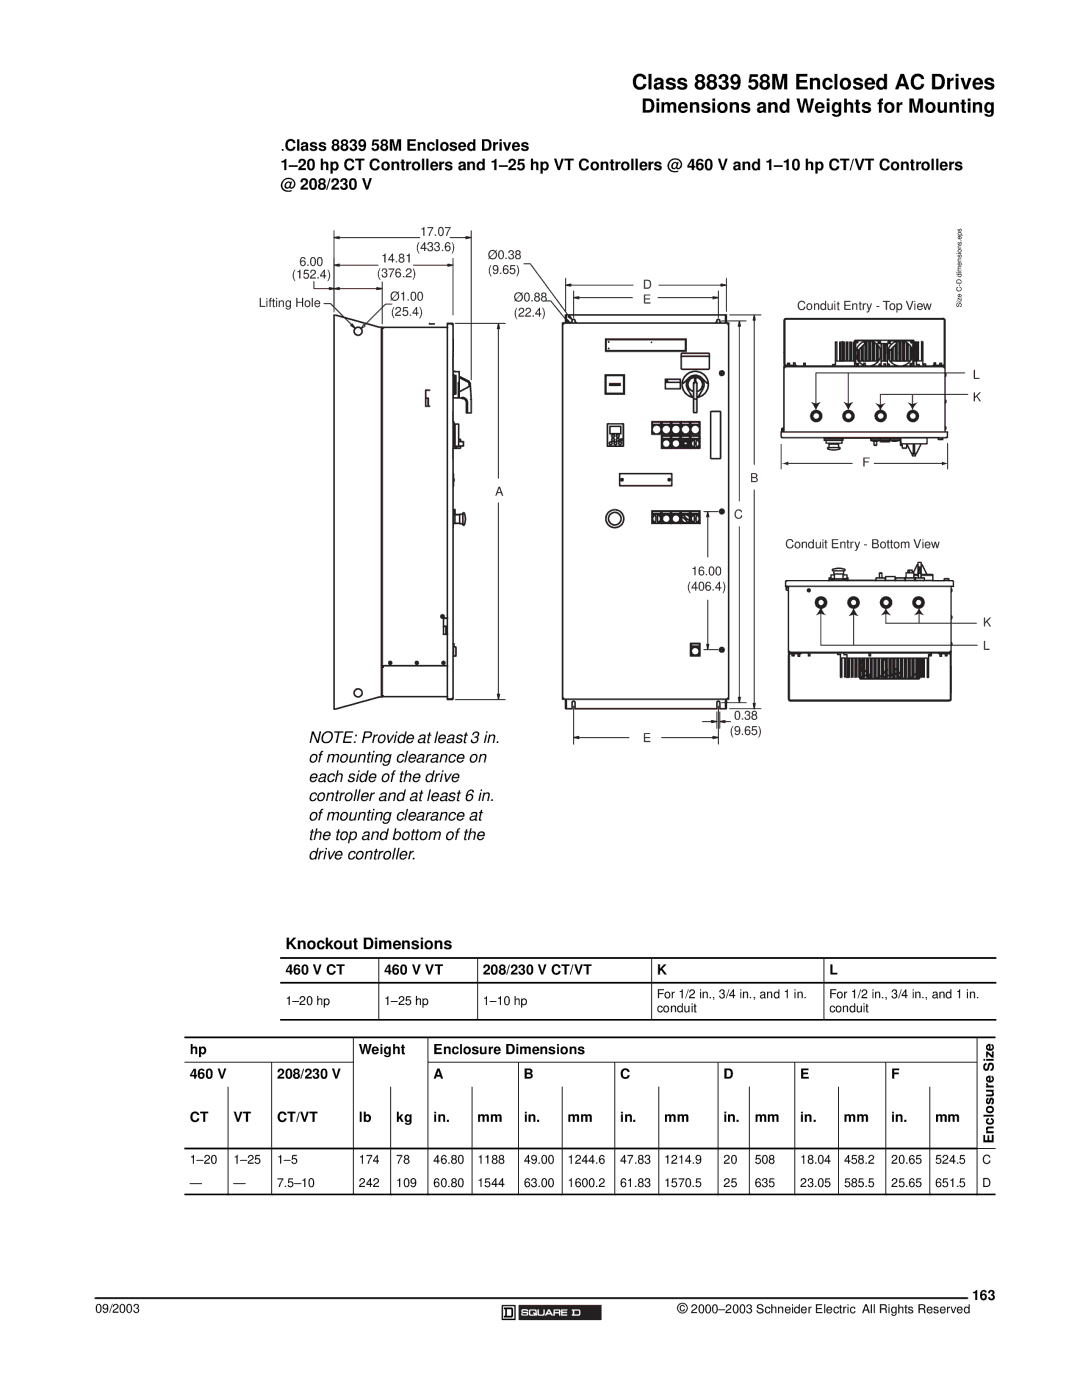 Schneider Electric 58 TRX manual Dimensions and Weights for Mounting, Knockout Dimensions, 208/230 V CT/VT, 163 